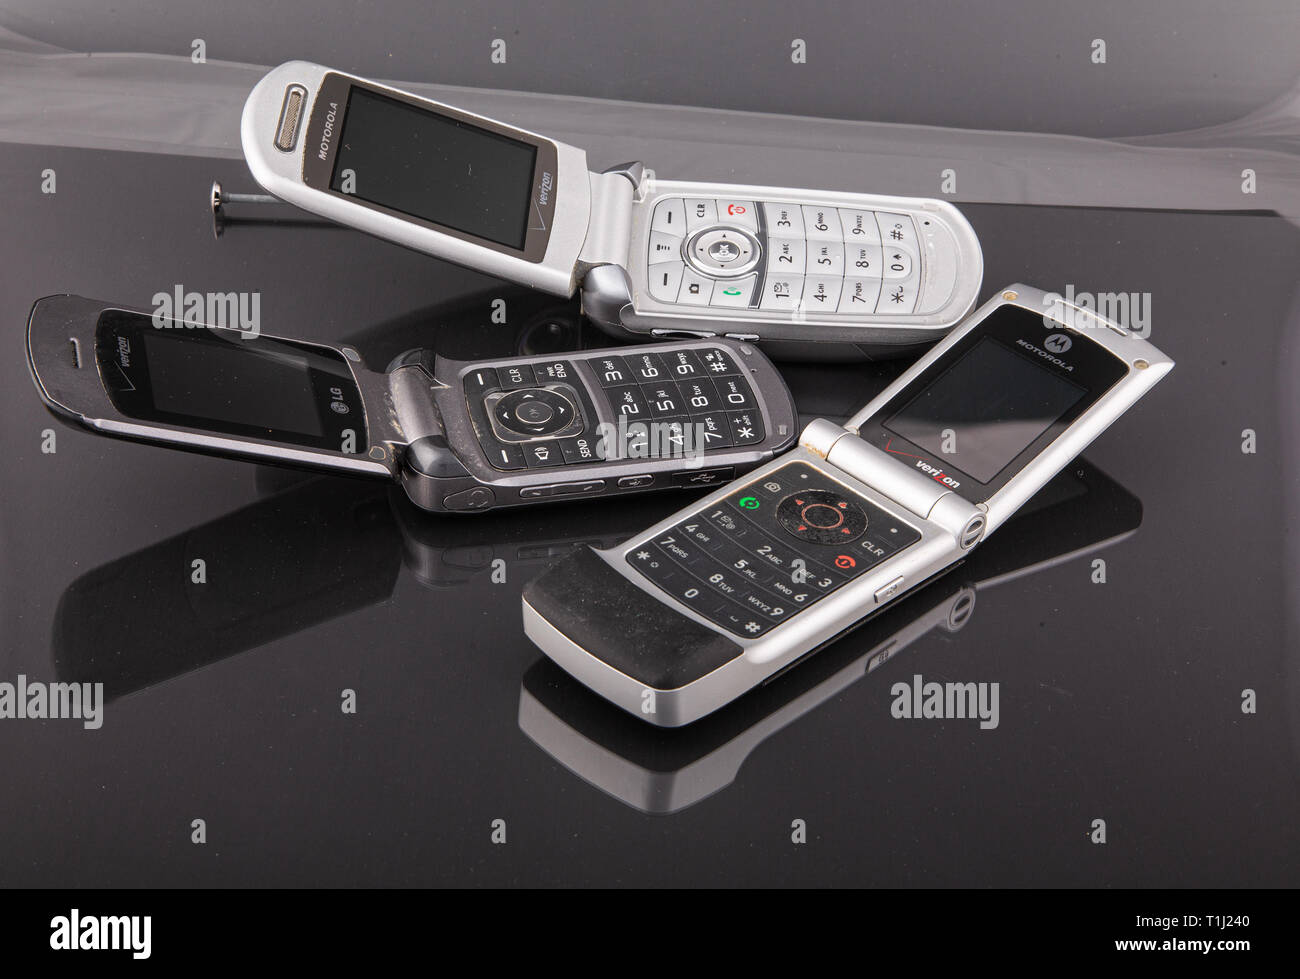 Old Classic Flip Style Cell Phones on Black Stock Photo